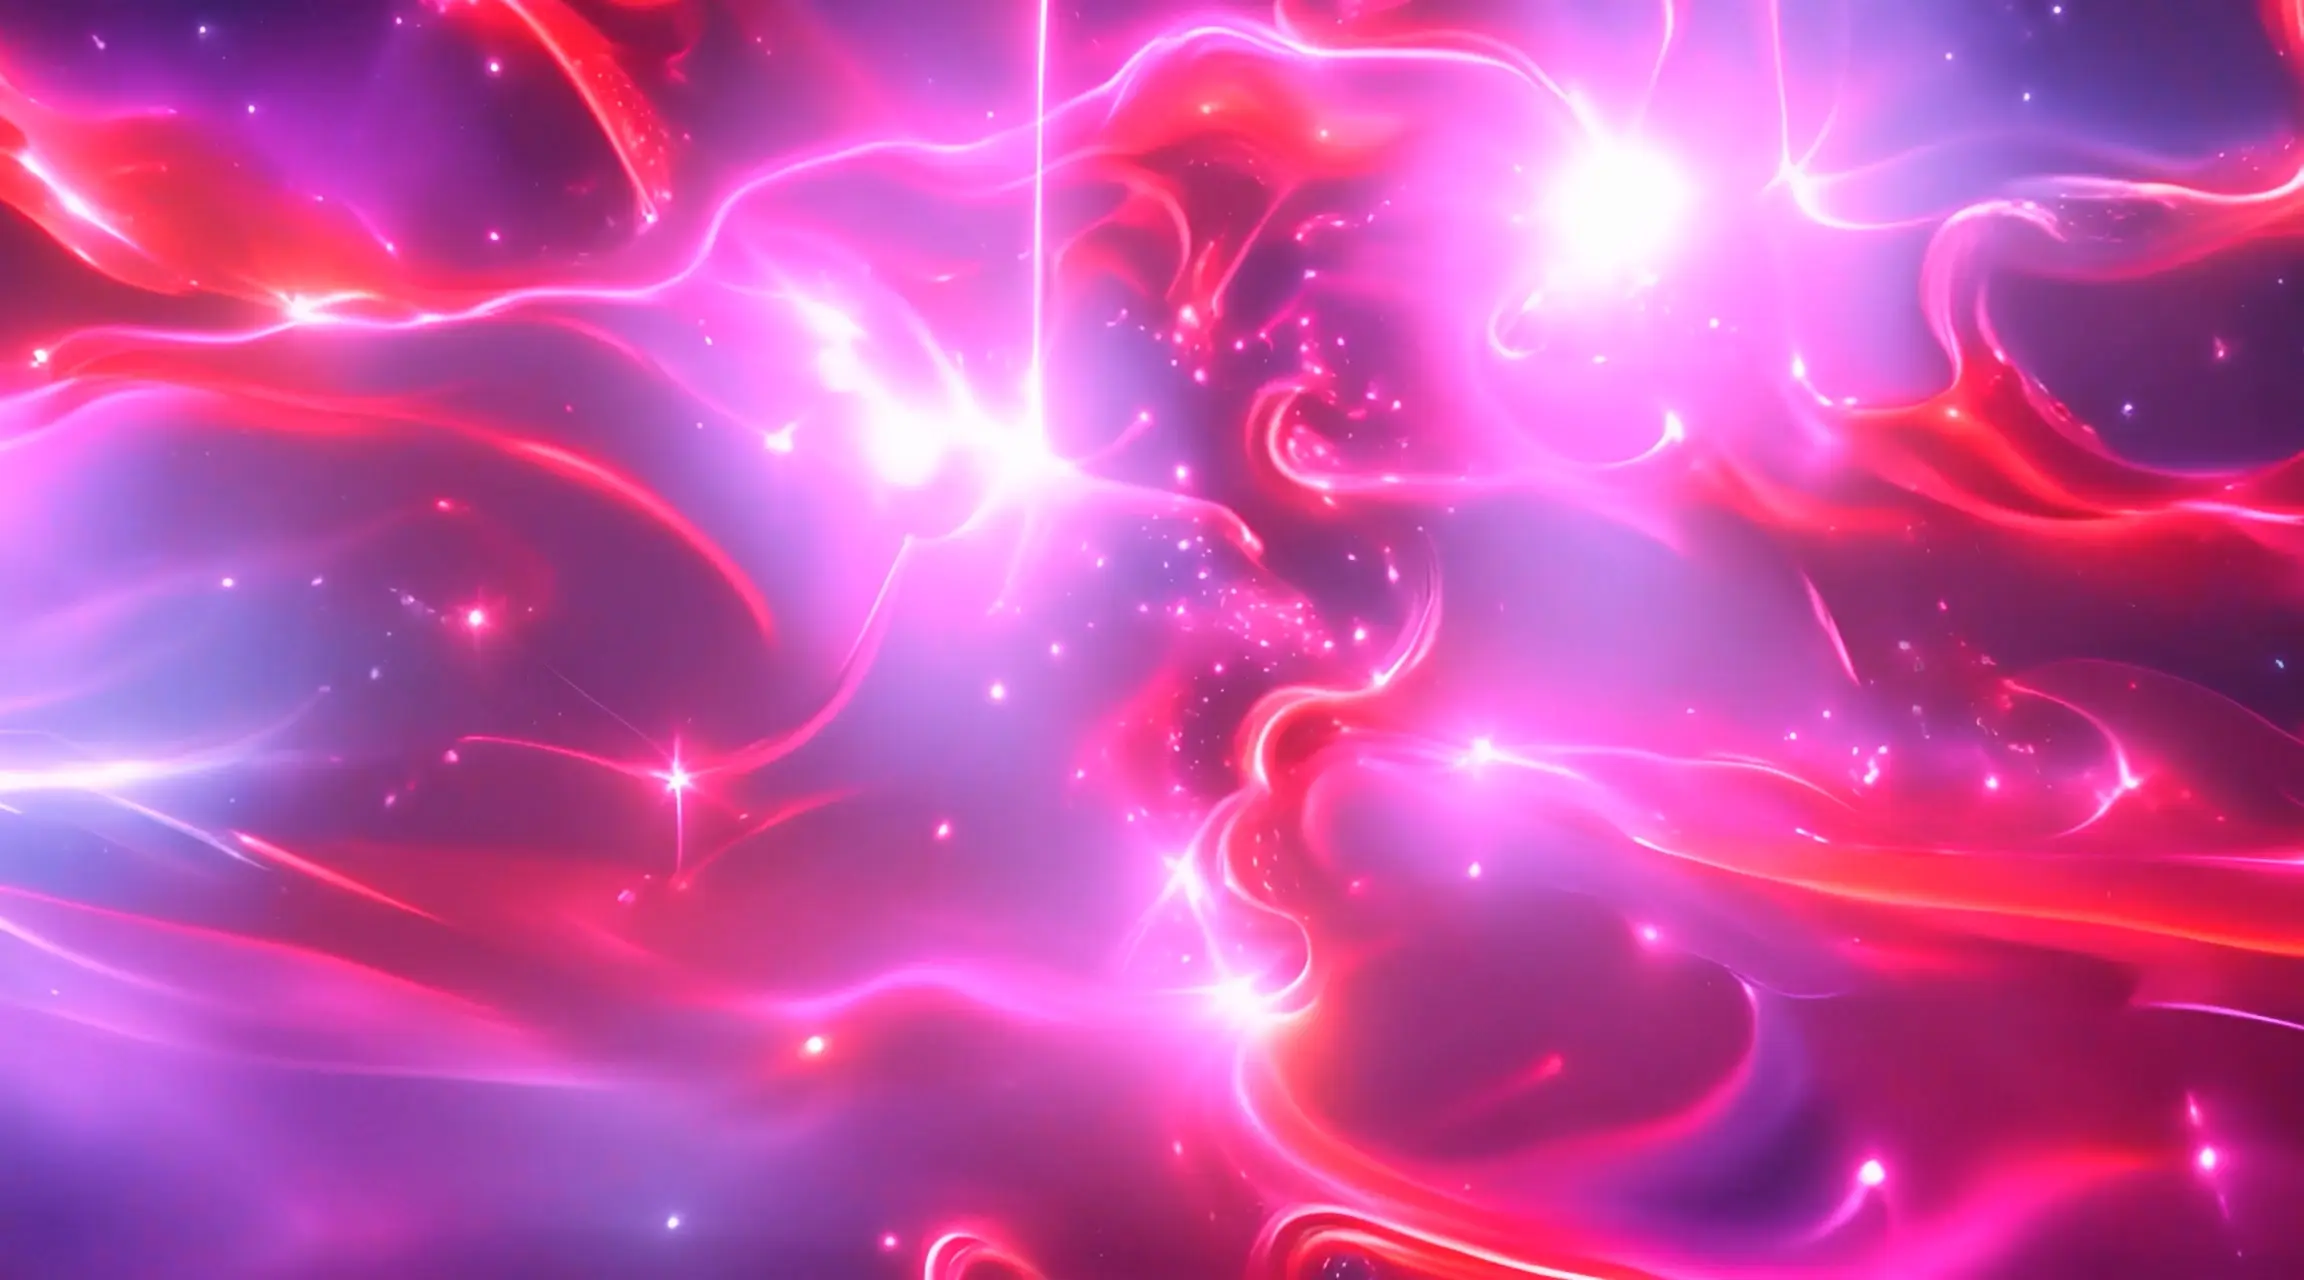 Cosmic Light Waves Vibrant Abstract Backdrop